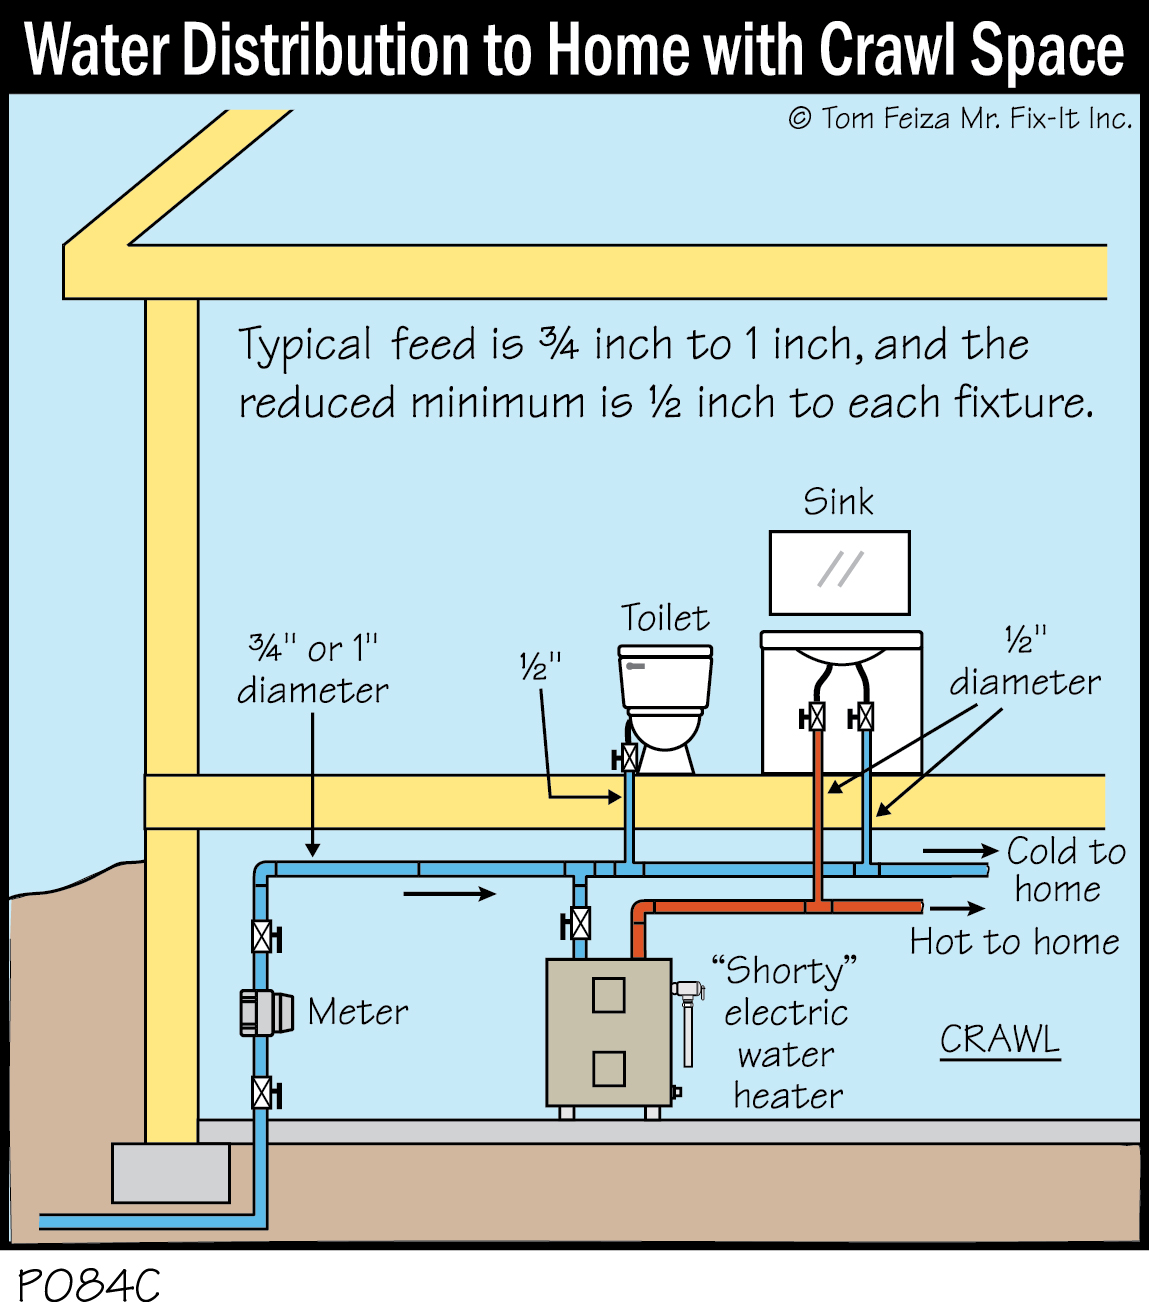 P084C - Water Distribution to Home with Crawl Space